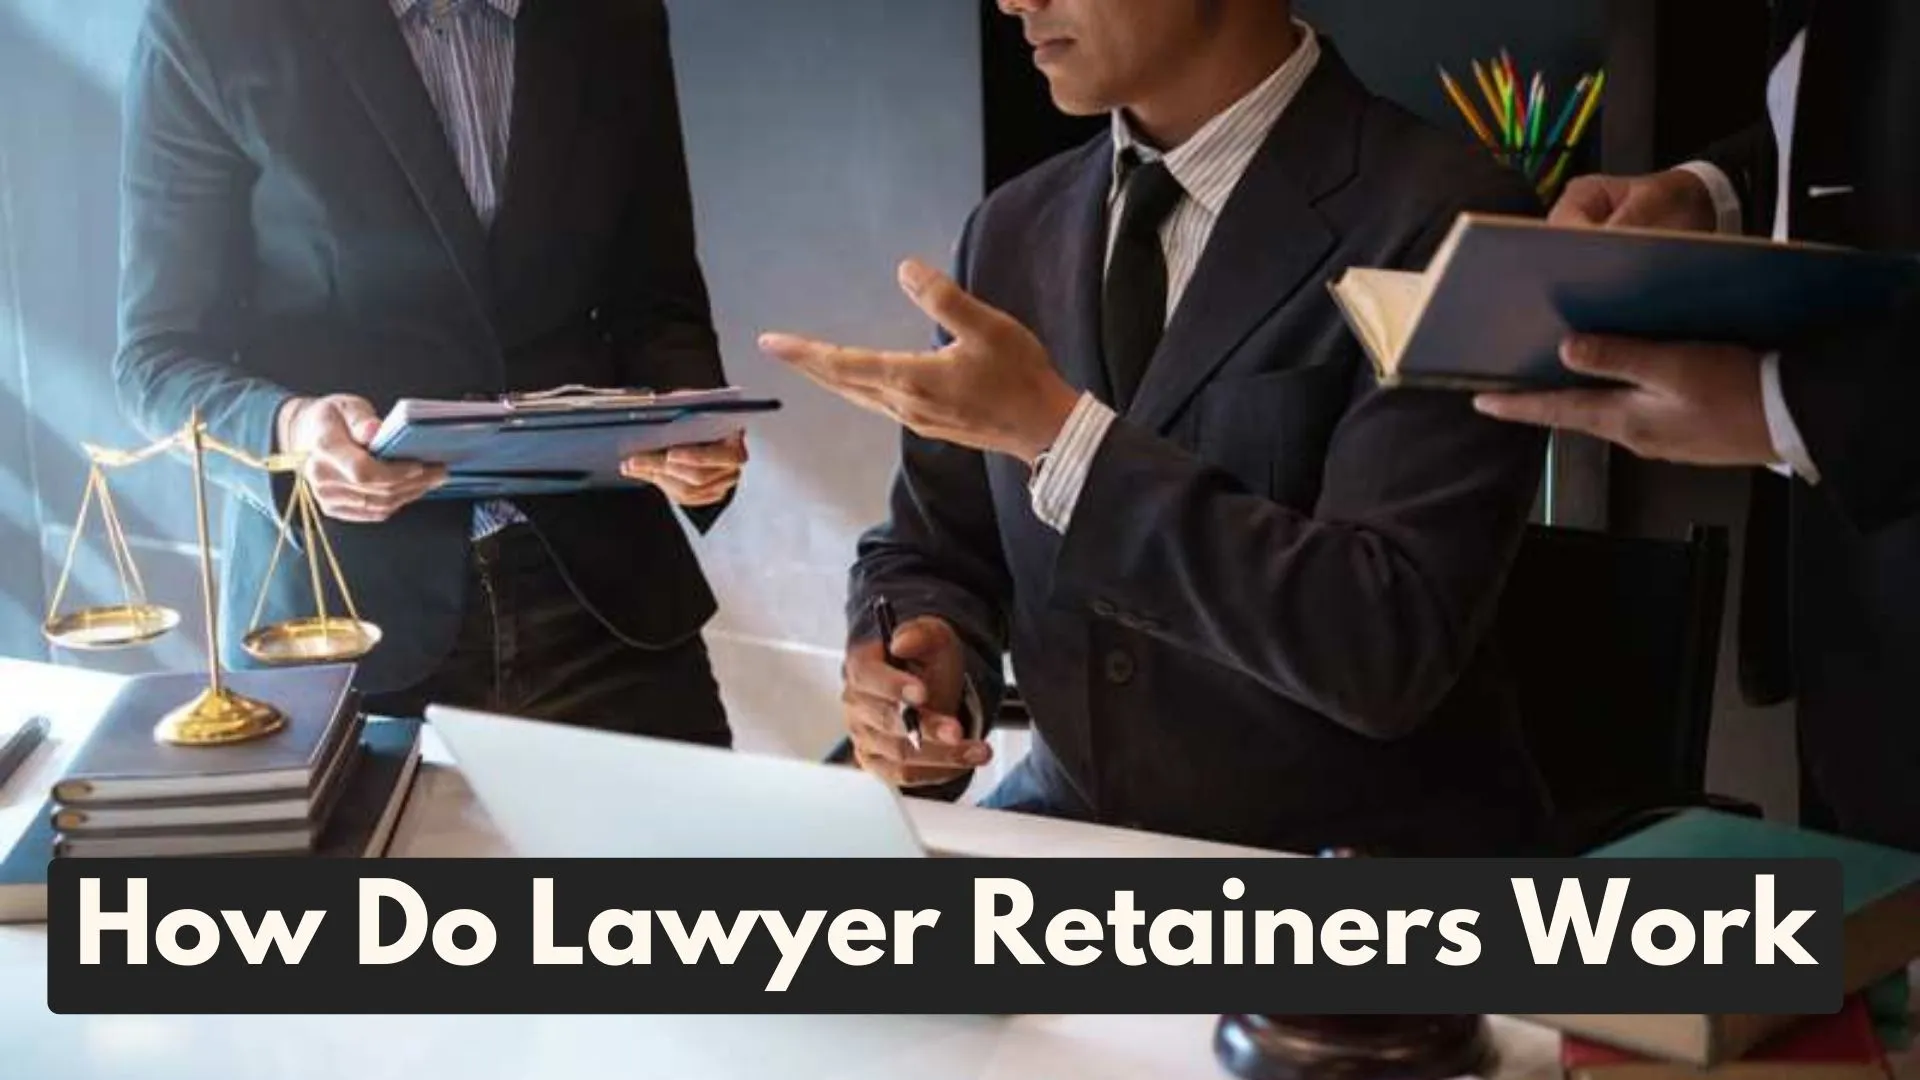 How Do Lawyer Retainers Work With Example & Scenario by the Legal stories Thelegalstories.com